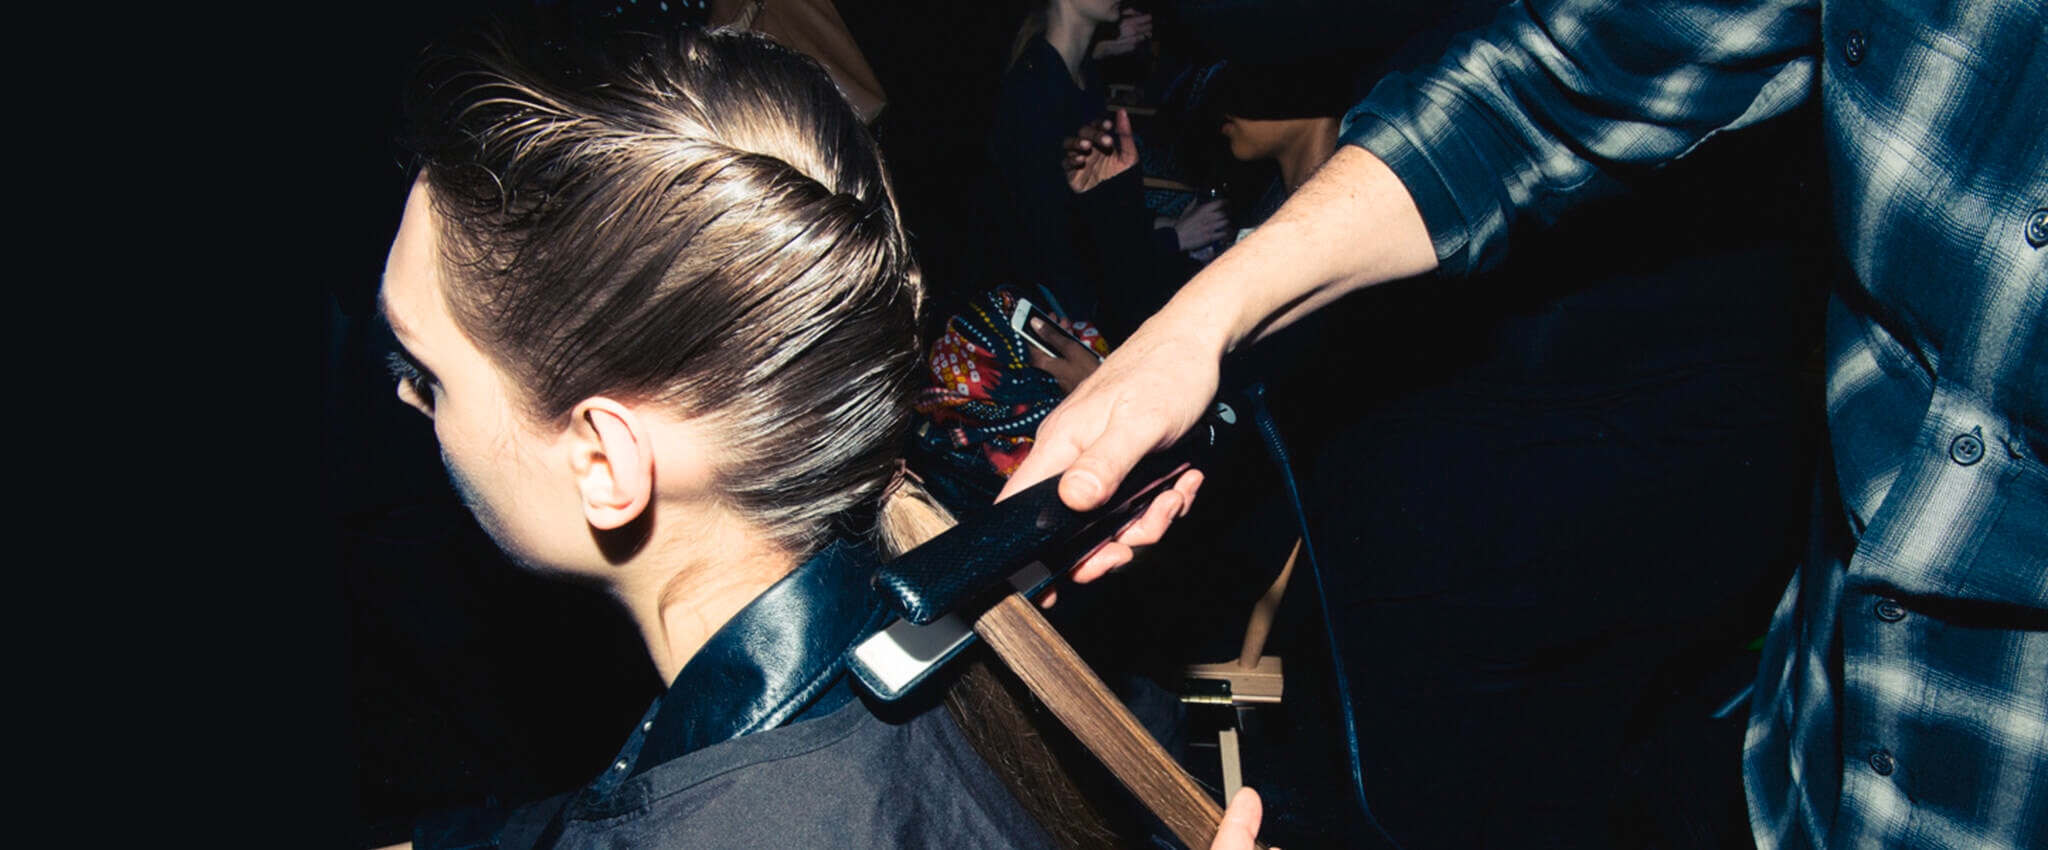 Backstage at a fashion show, a stylist straightens a model's long brown hair.